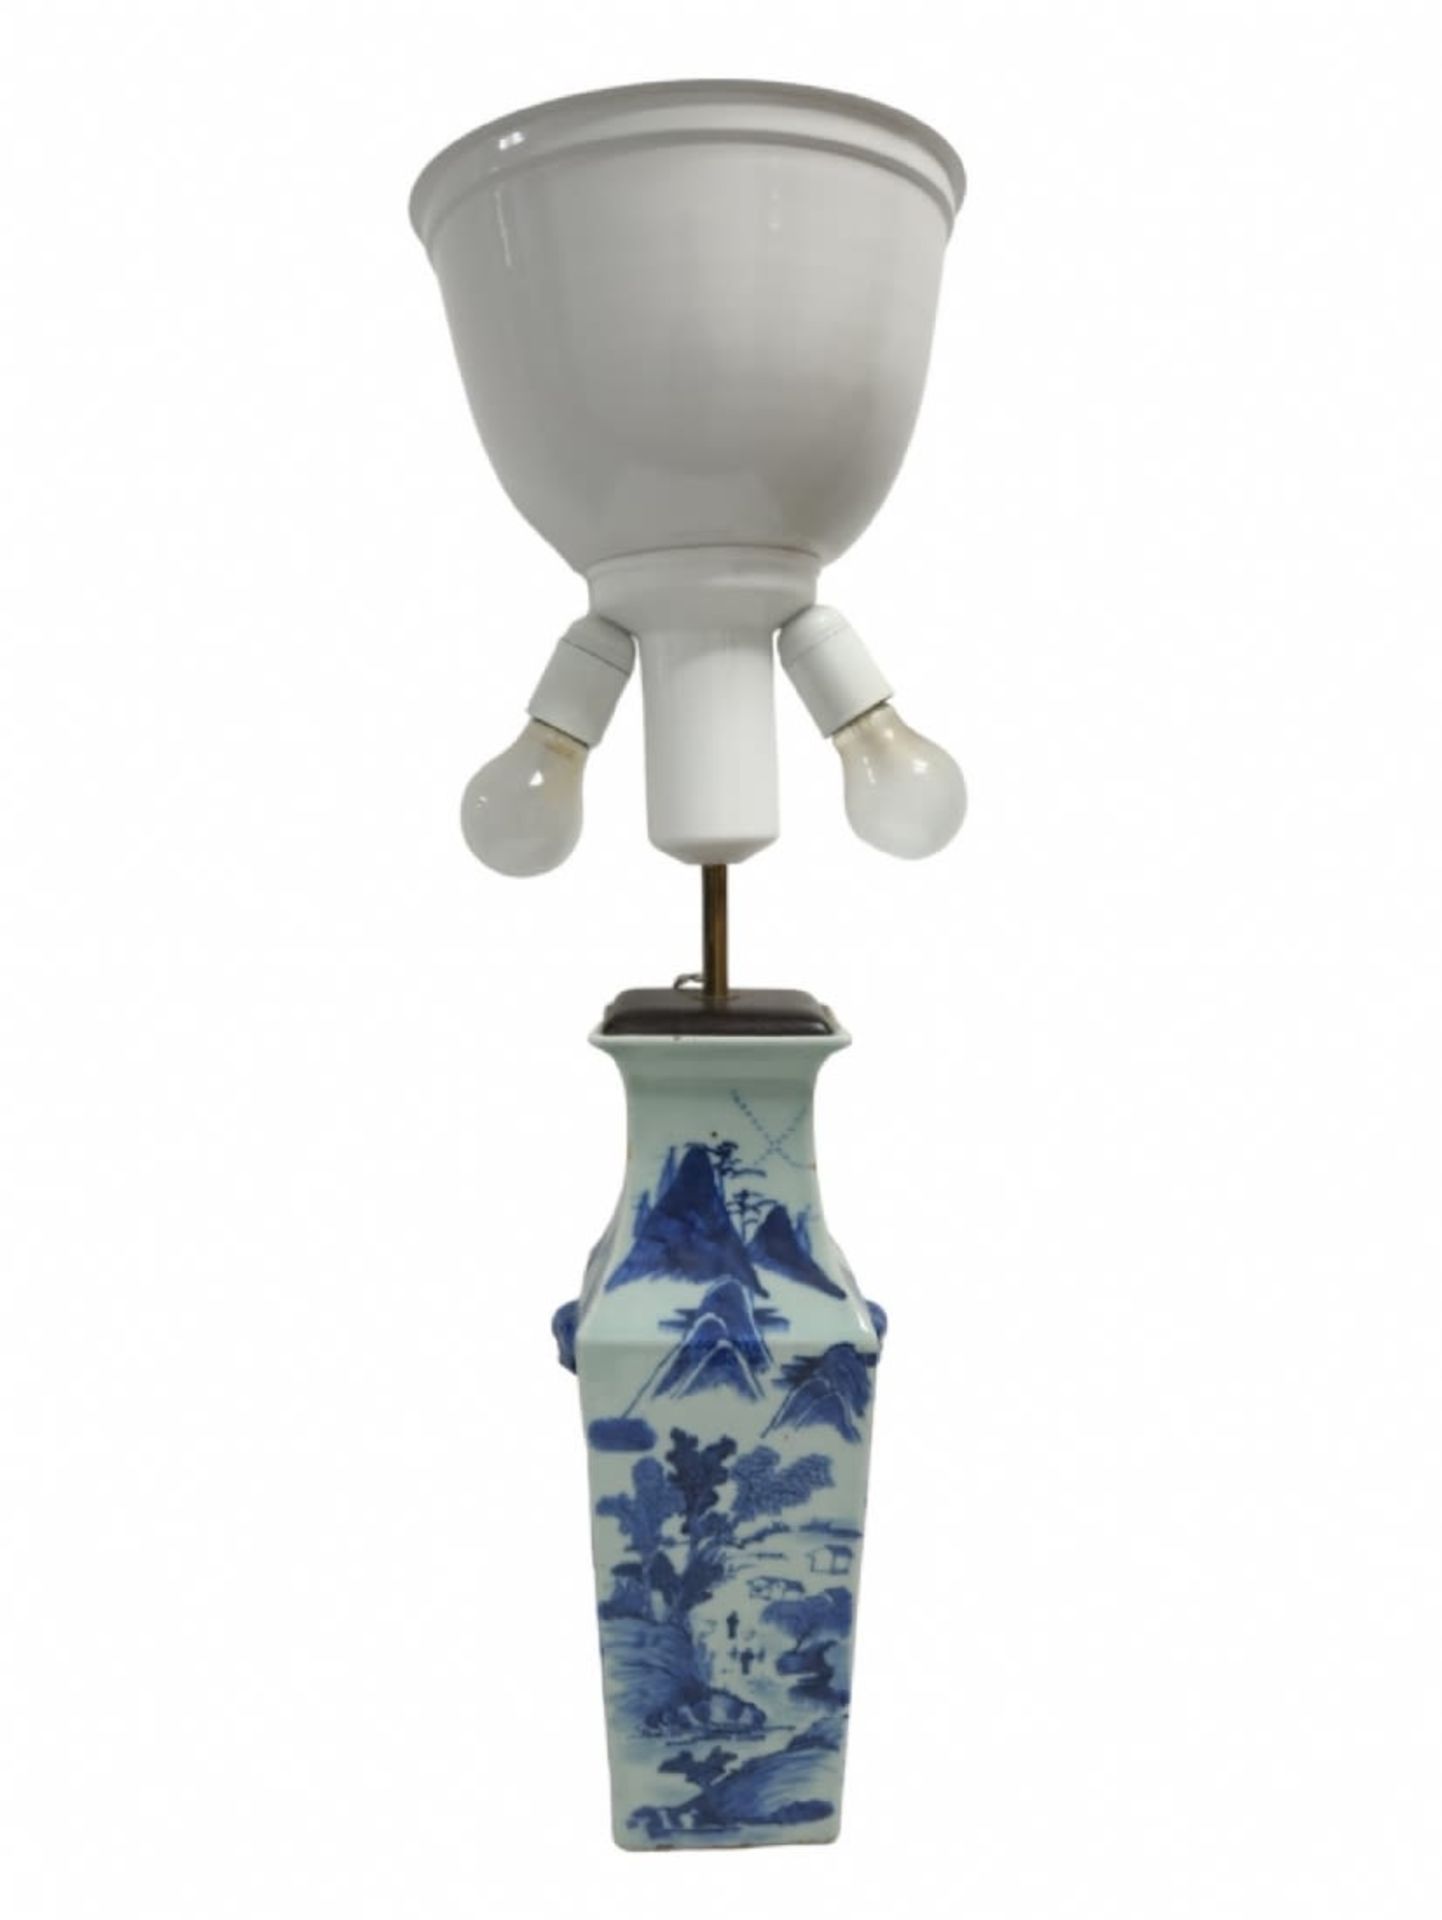 Chinese base (leg) for a table lamp, a square blue and white porcelain jug, wooden base and - Image 2 of 5